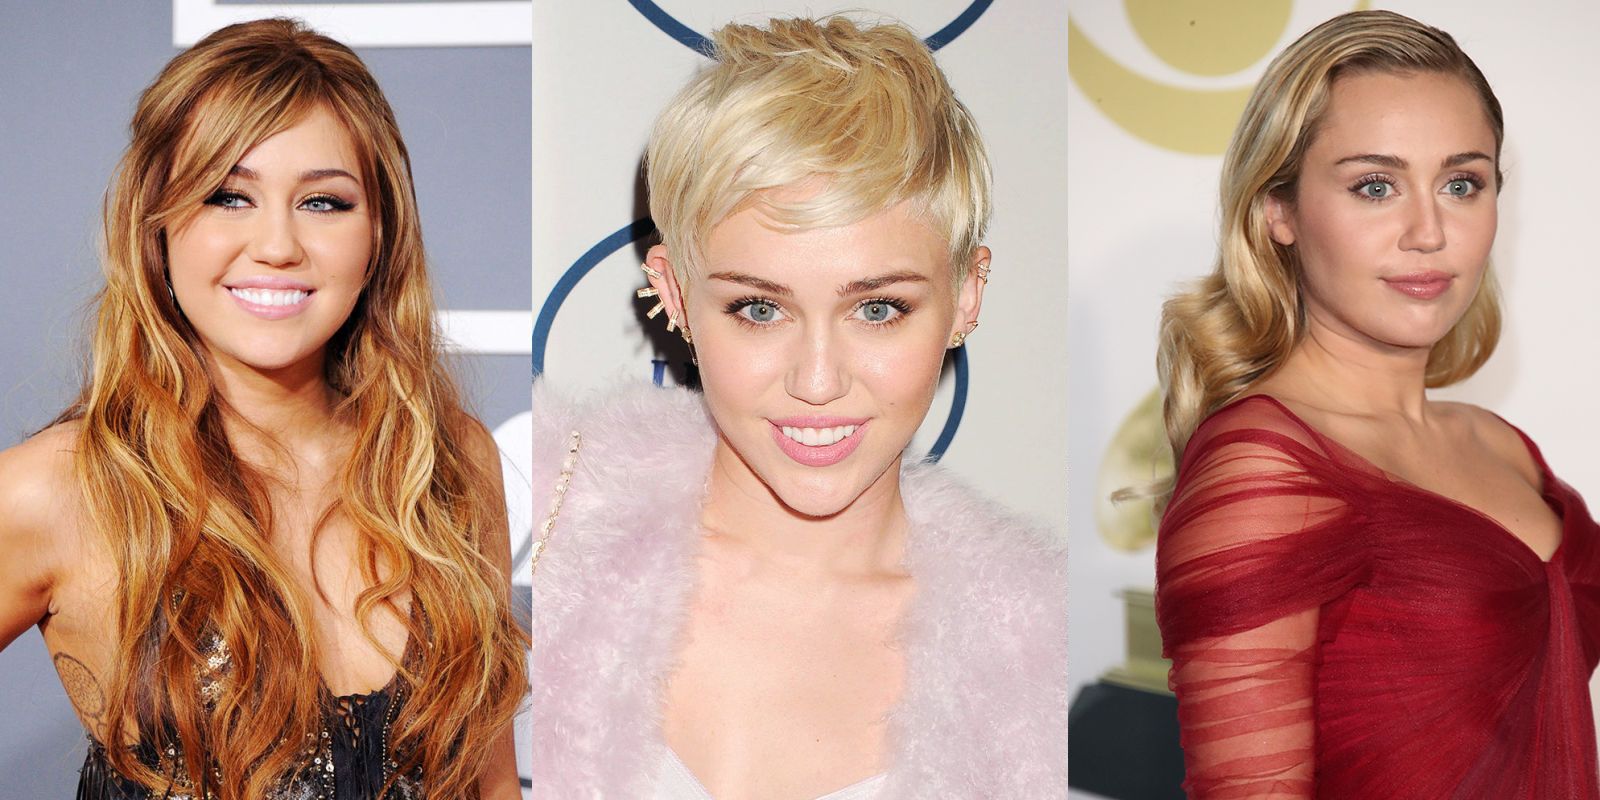 Miley Cyrus Best Hairstyles Of All Time 66 Miley Cyrus Hair Cuts And Colors